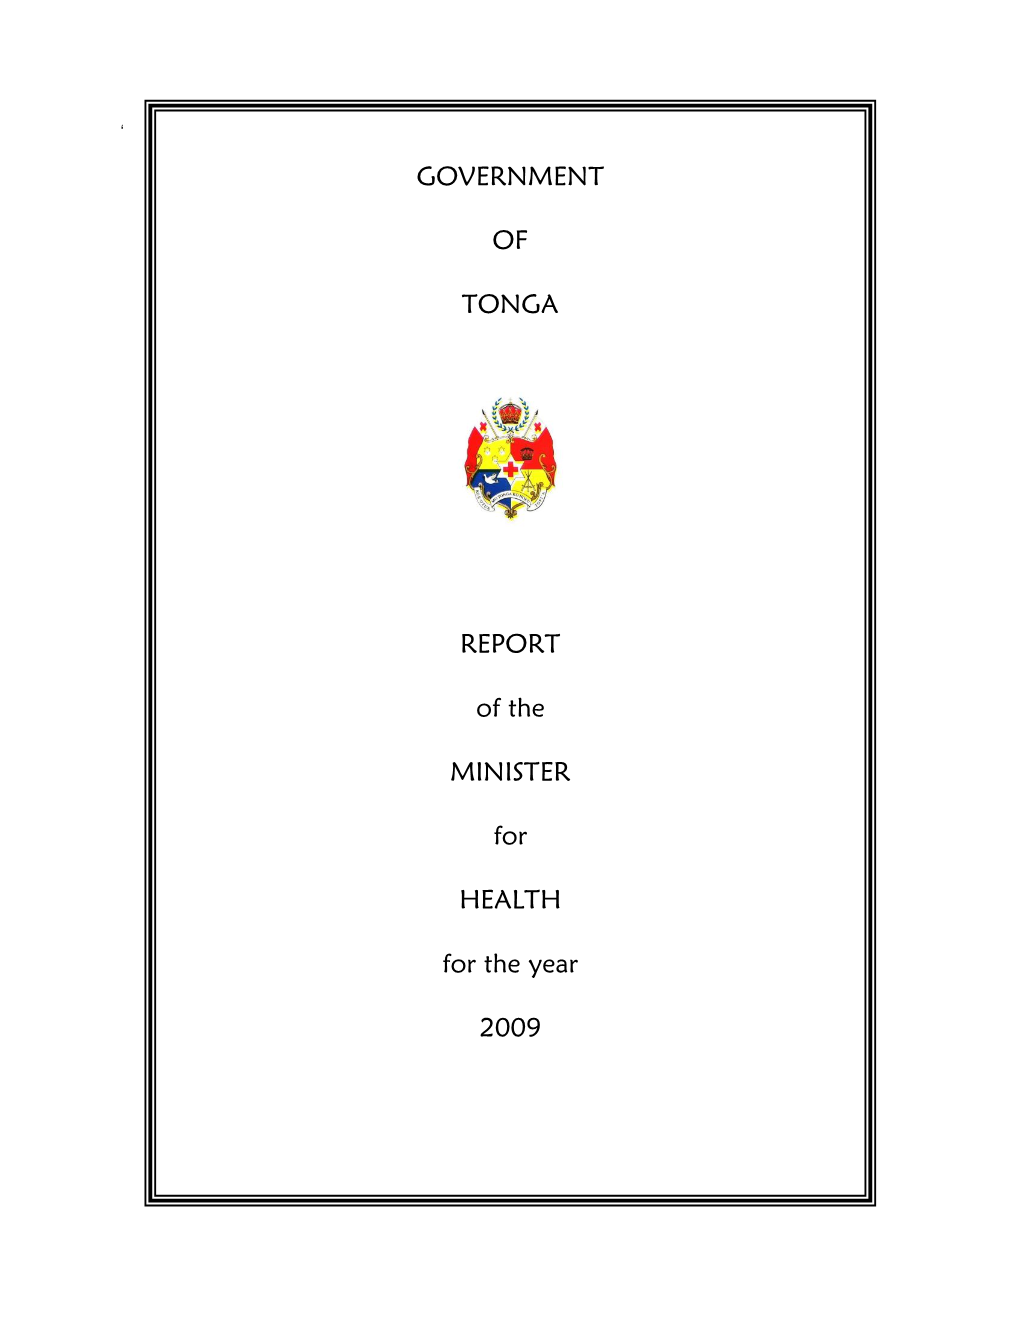 GOVERNMENT of TONGA REPORT of the MINISTER for HEALTH for The